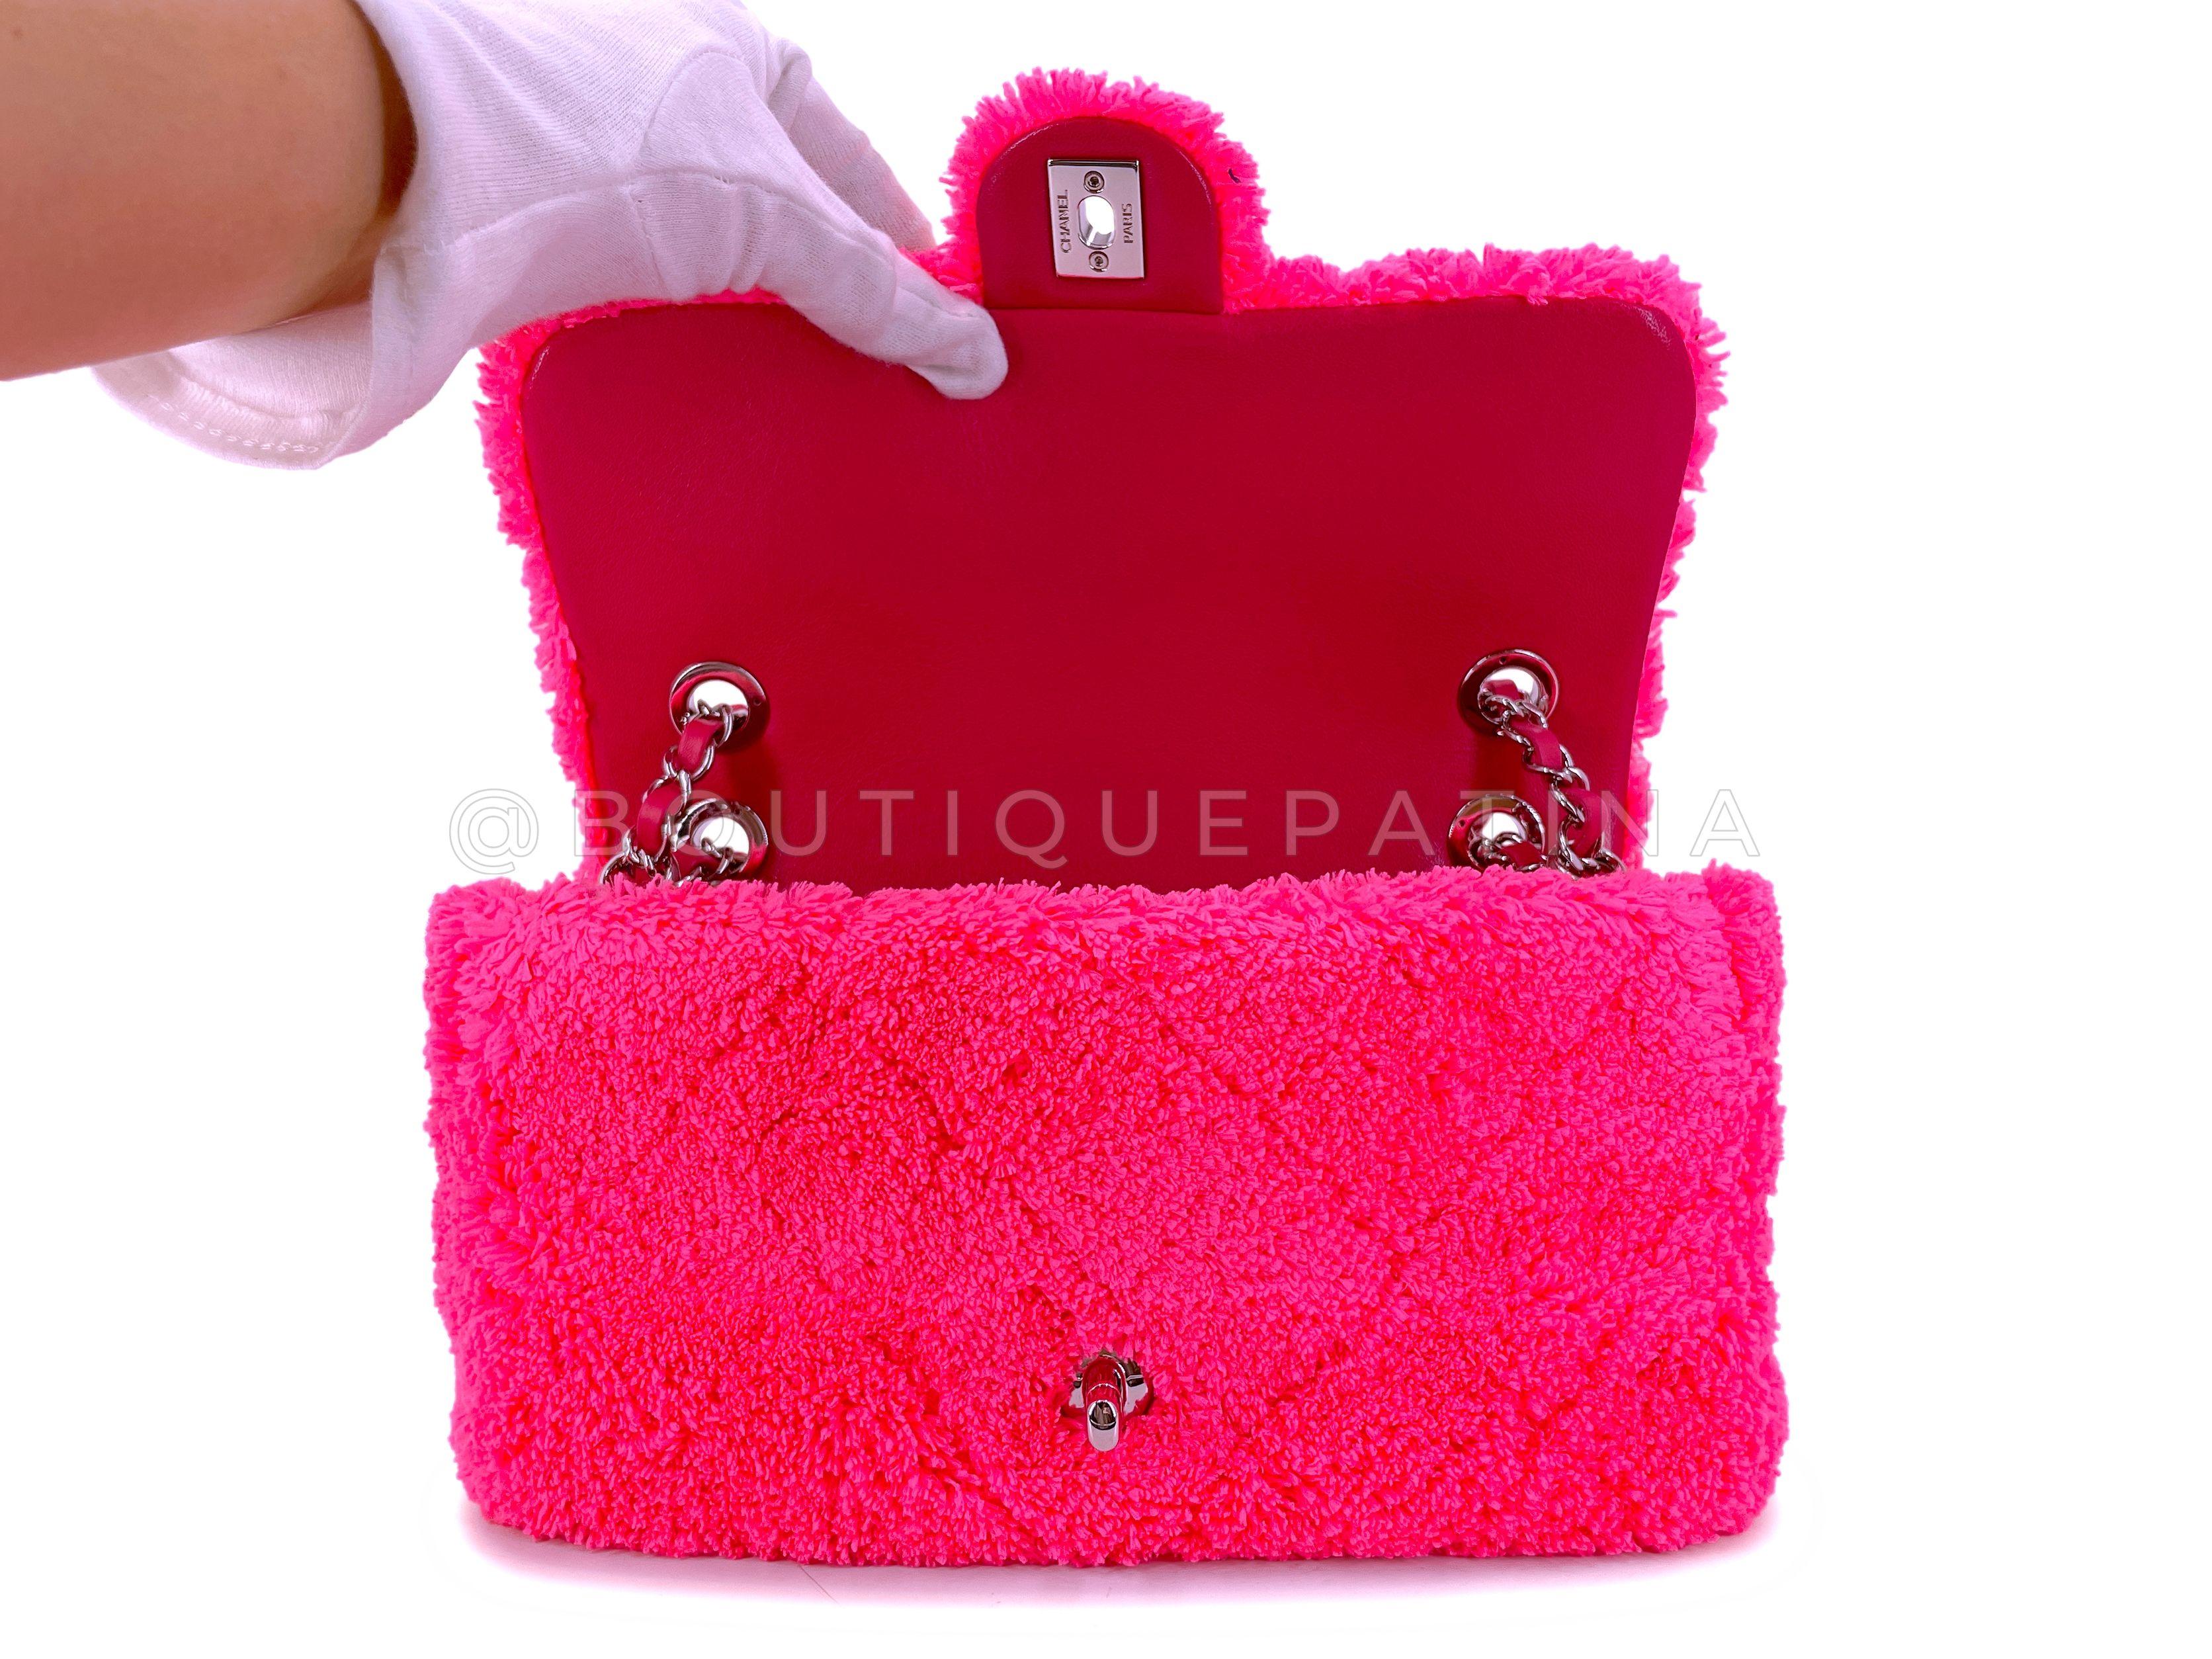 Chanel Neon Pink Terry Fur Flap Bag 67683 For Sale 5